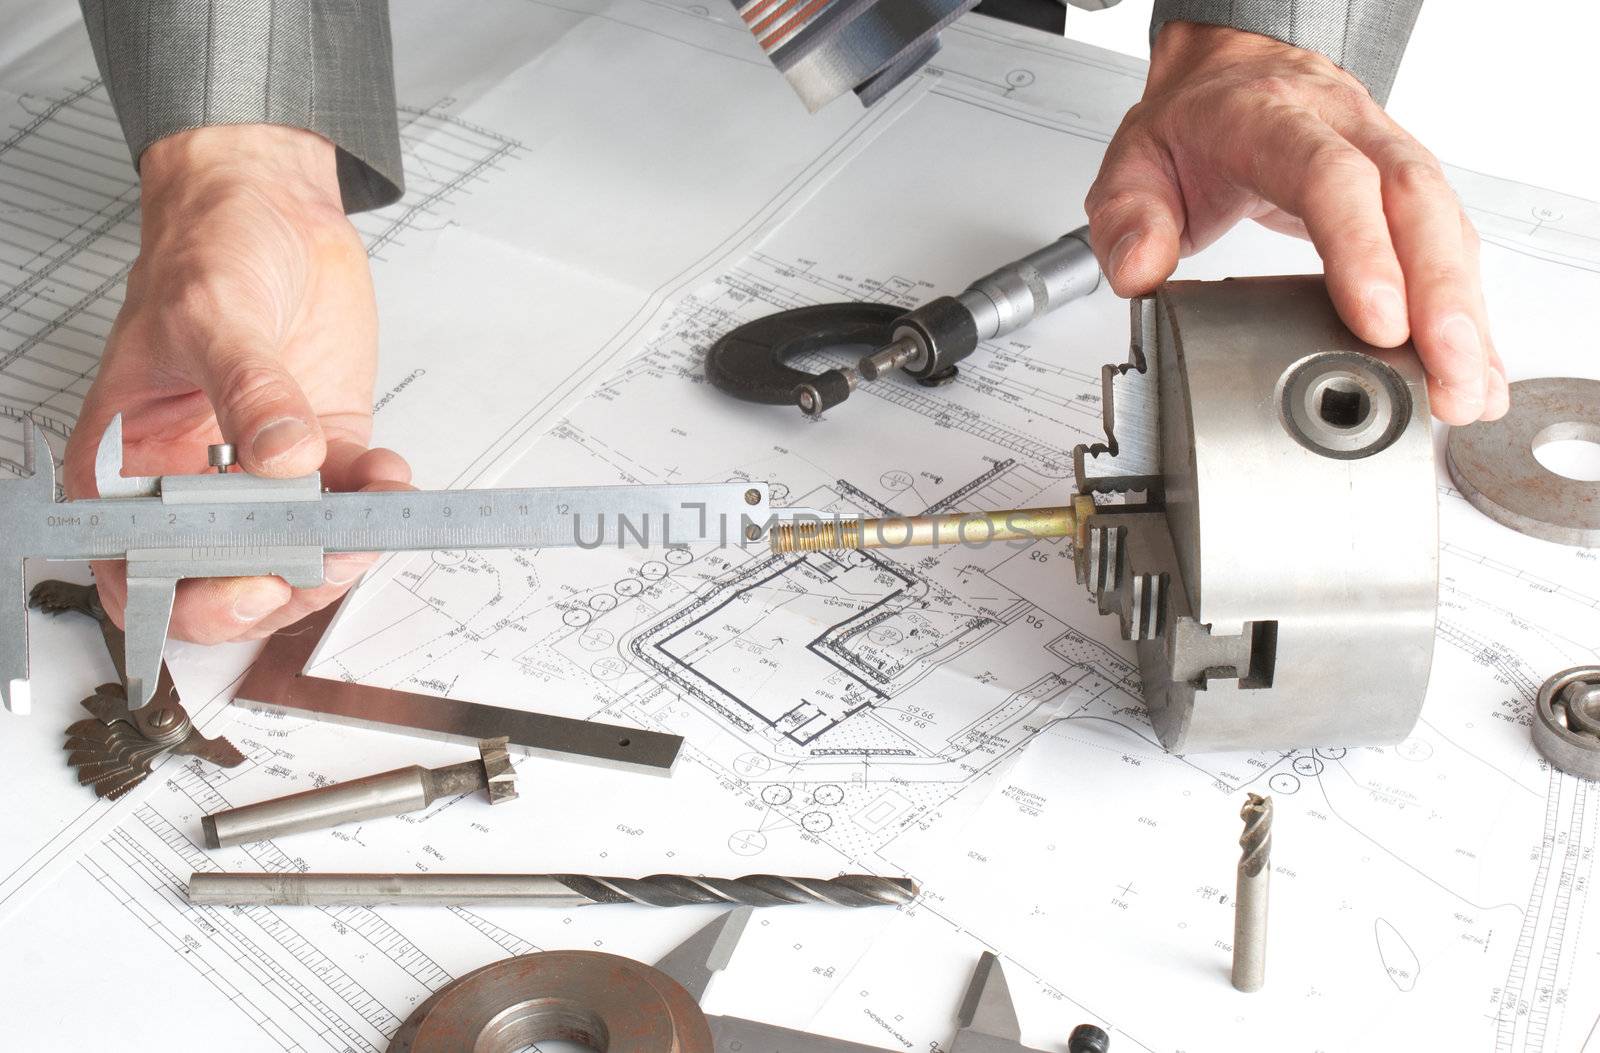 Finished goods quality assurance in mechanical engineering is carried out by the measuring tool